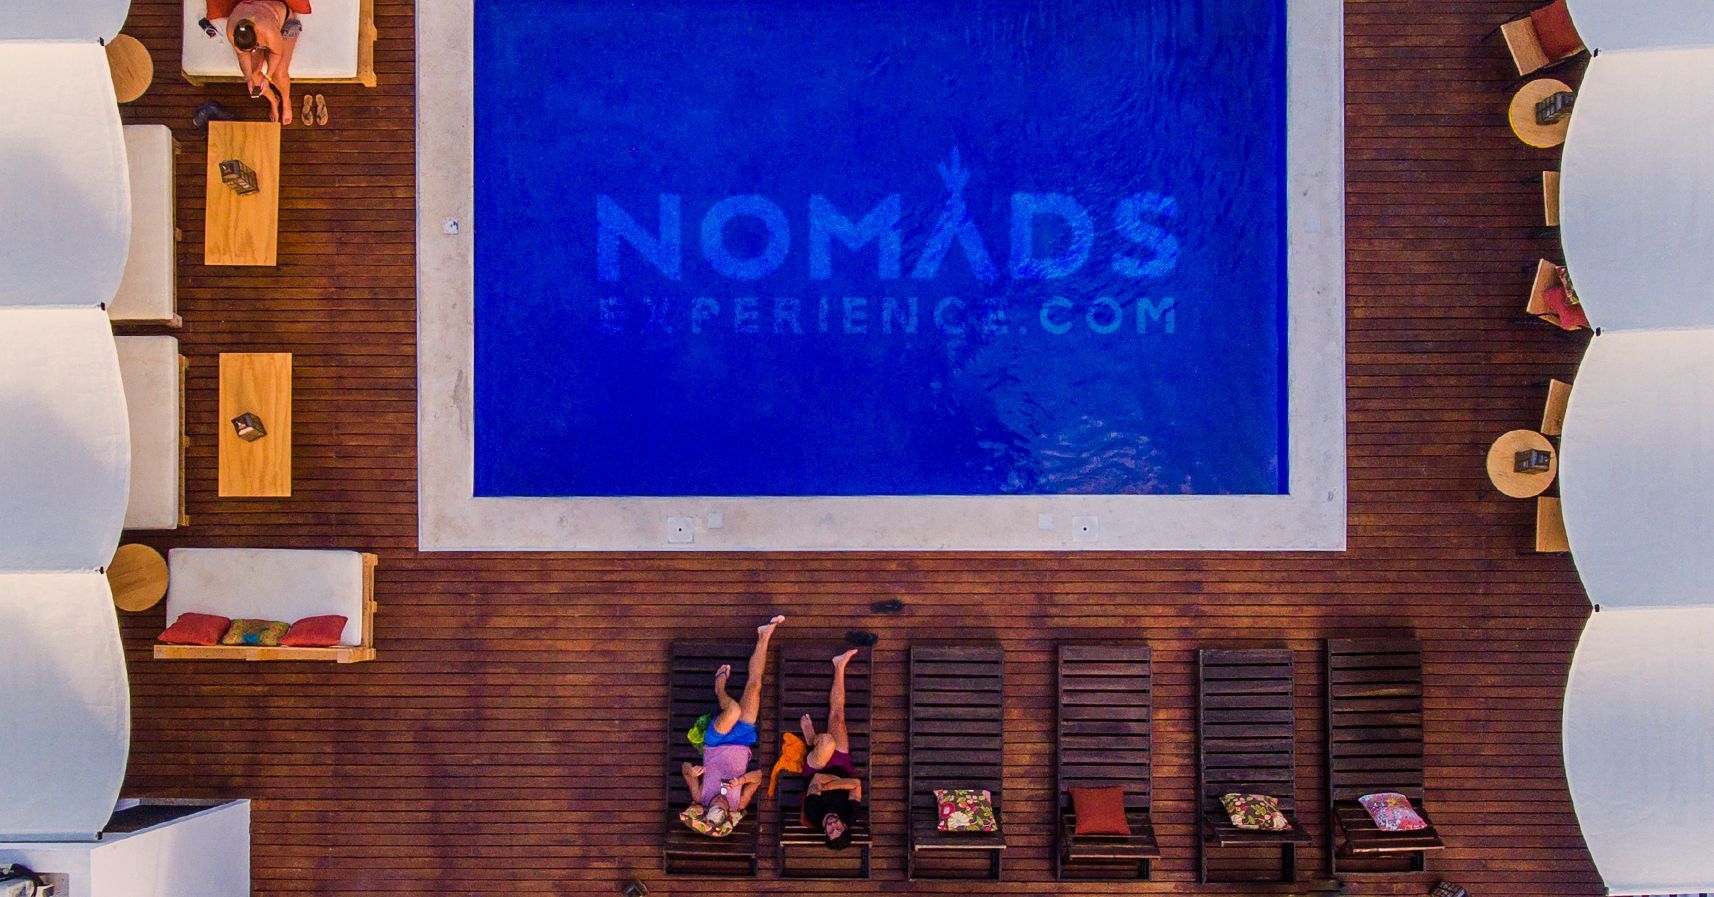 Nomads Hostels recognized as one of the best hostels in the world